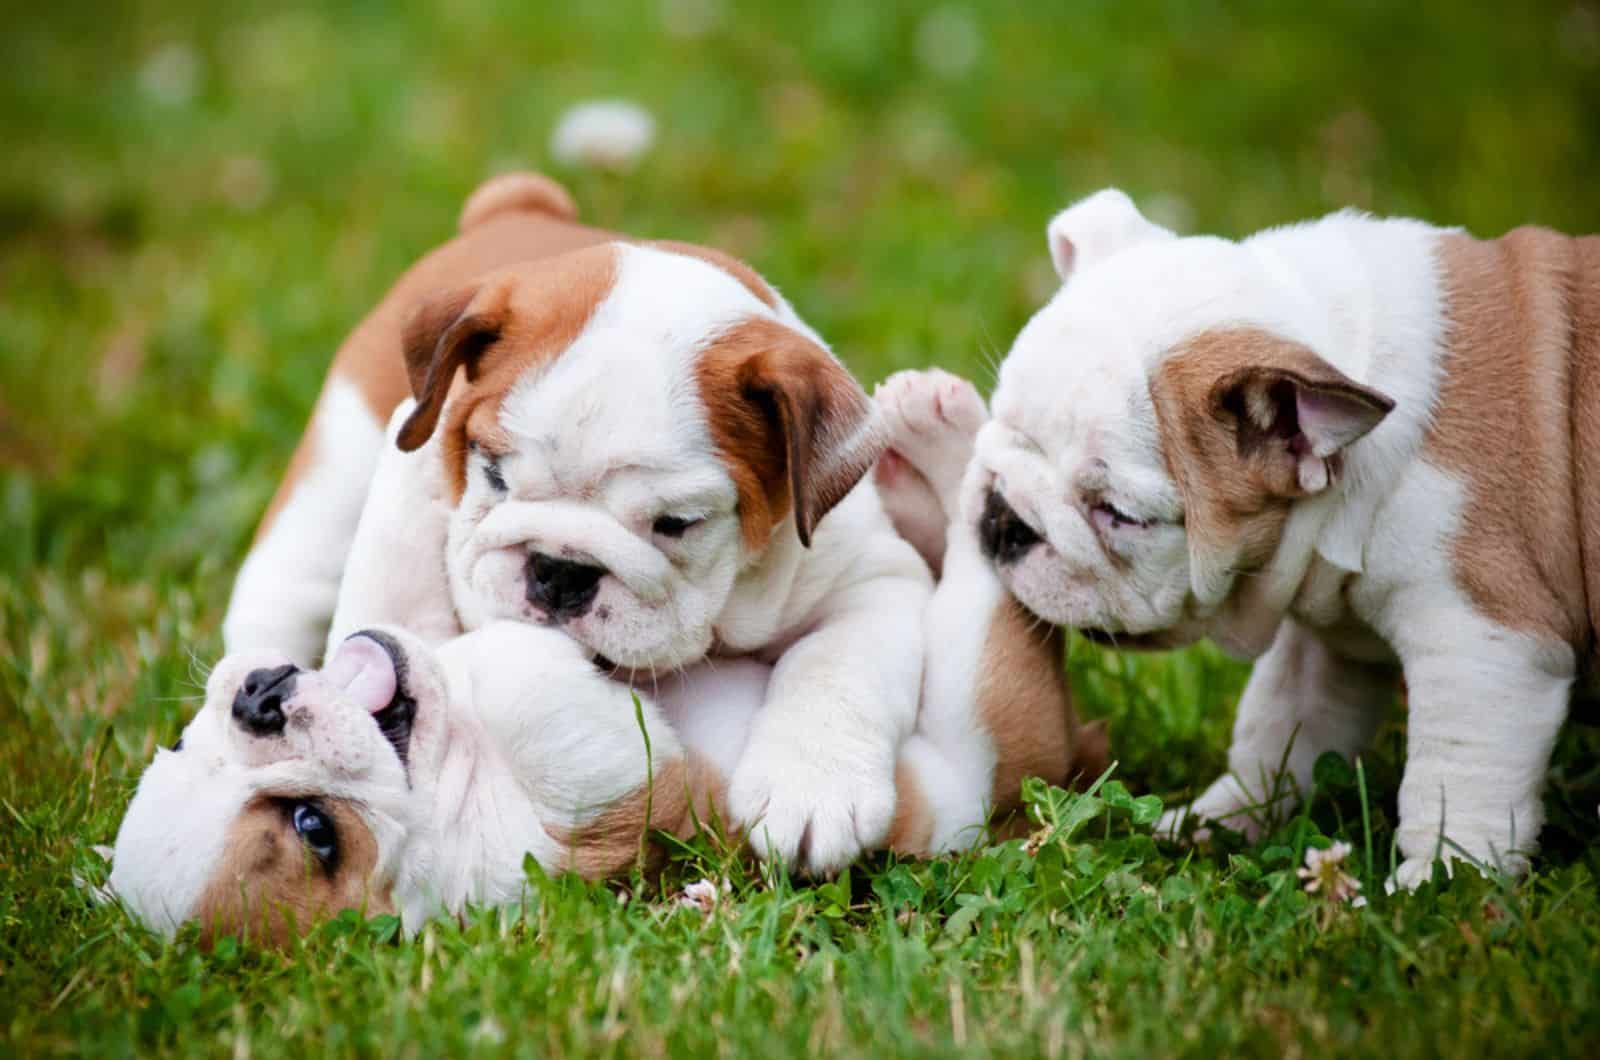 english bulldog puppies playing in the grass